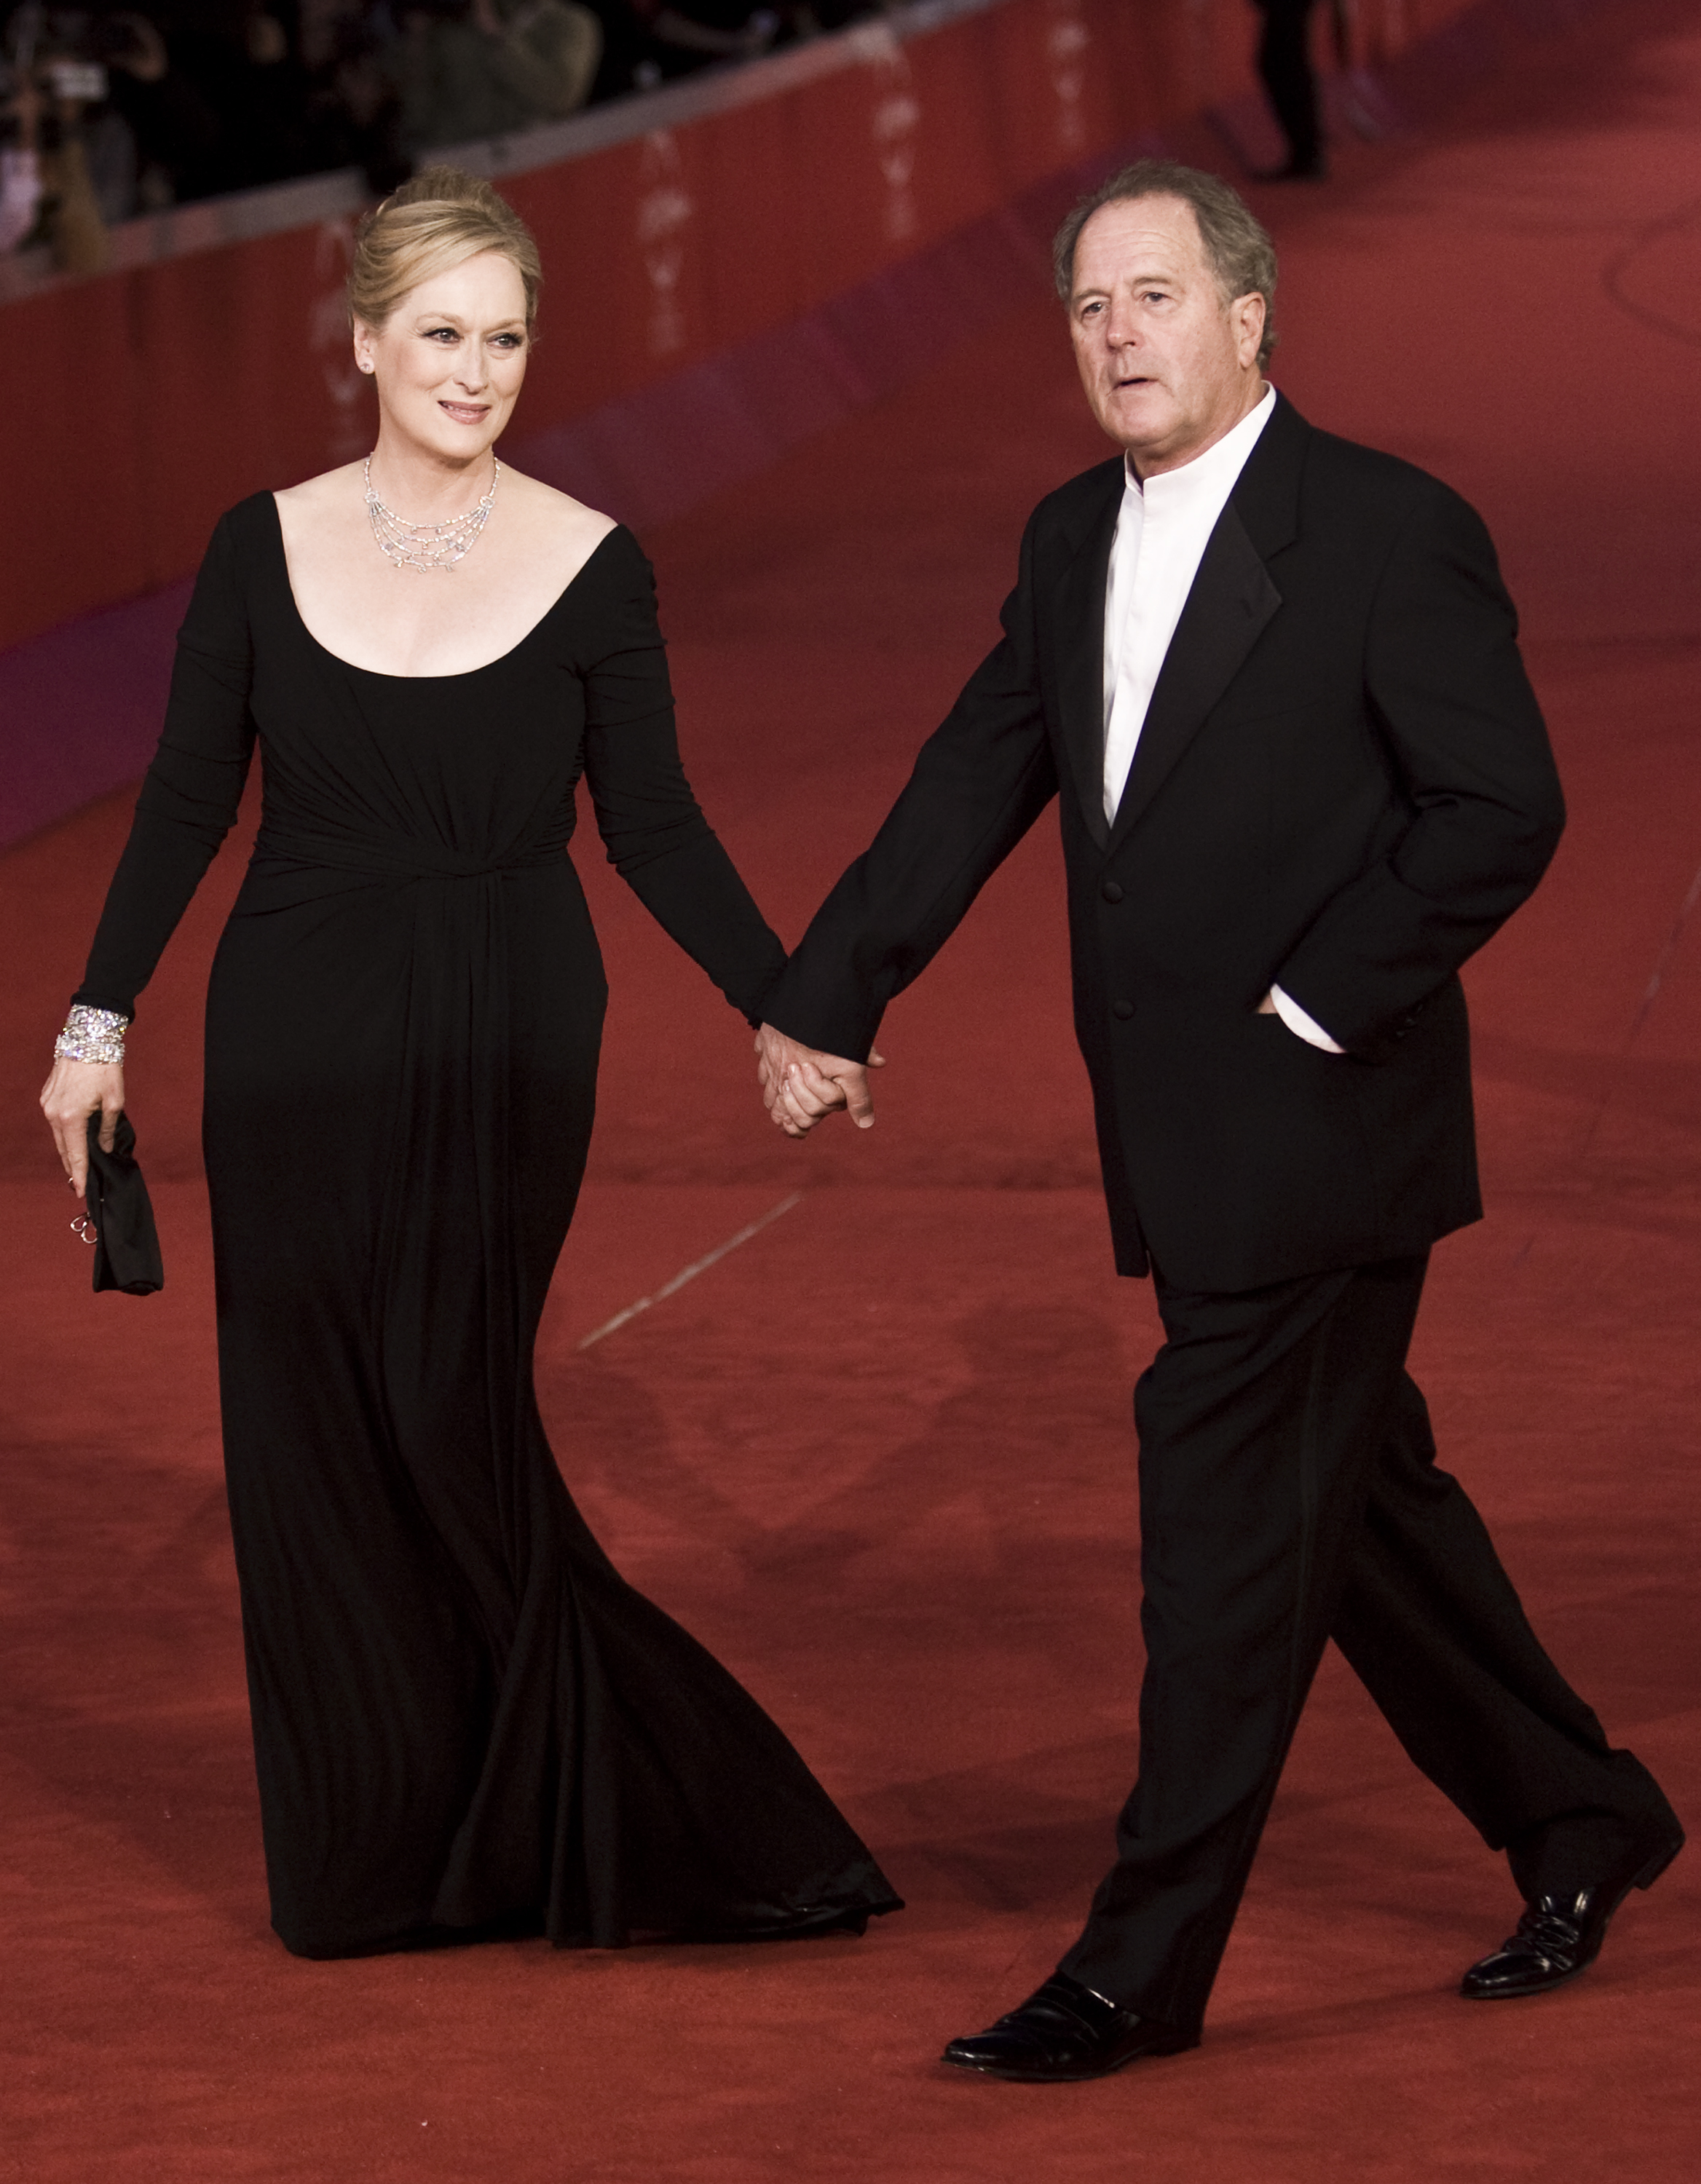 Meryl Streep and Don Gummer in Rome, Italy on October 23, 2009 | Source: Getty Images